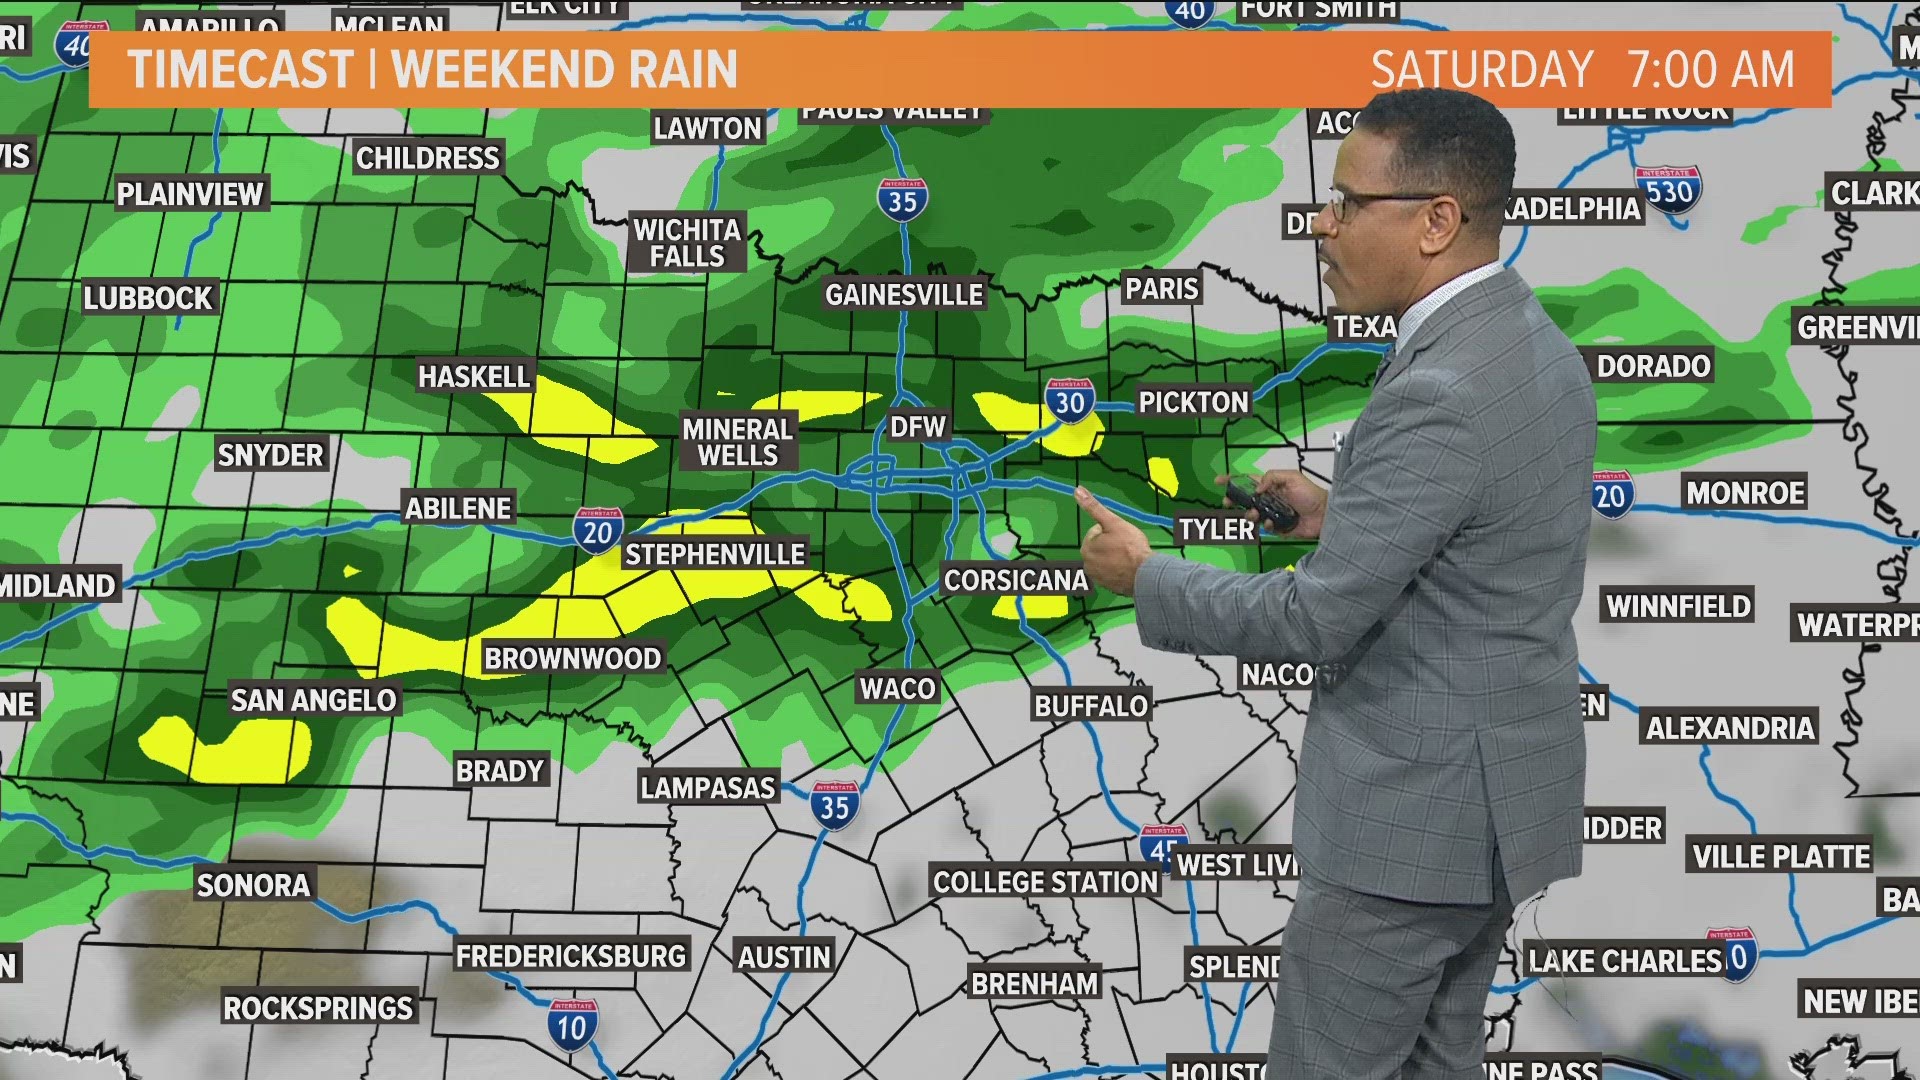 Greg Fields takes a look at the DFW weather forecast for this weekend.